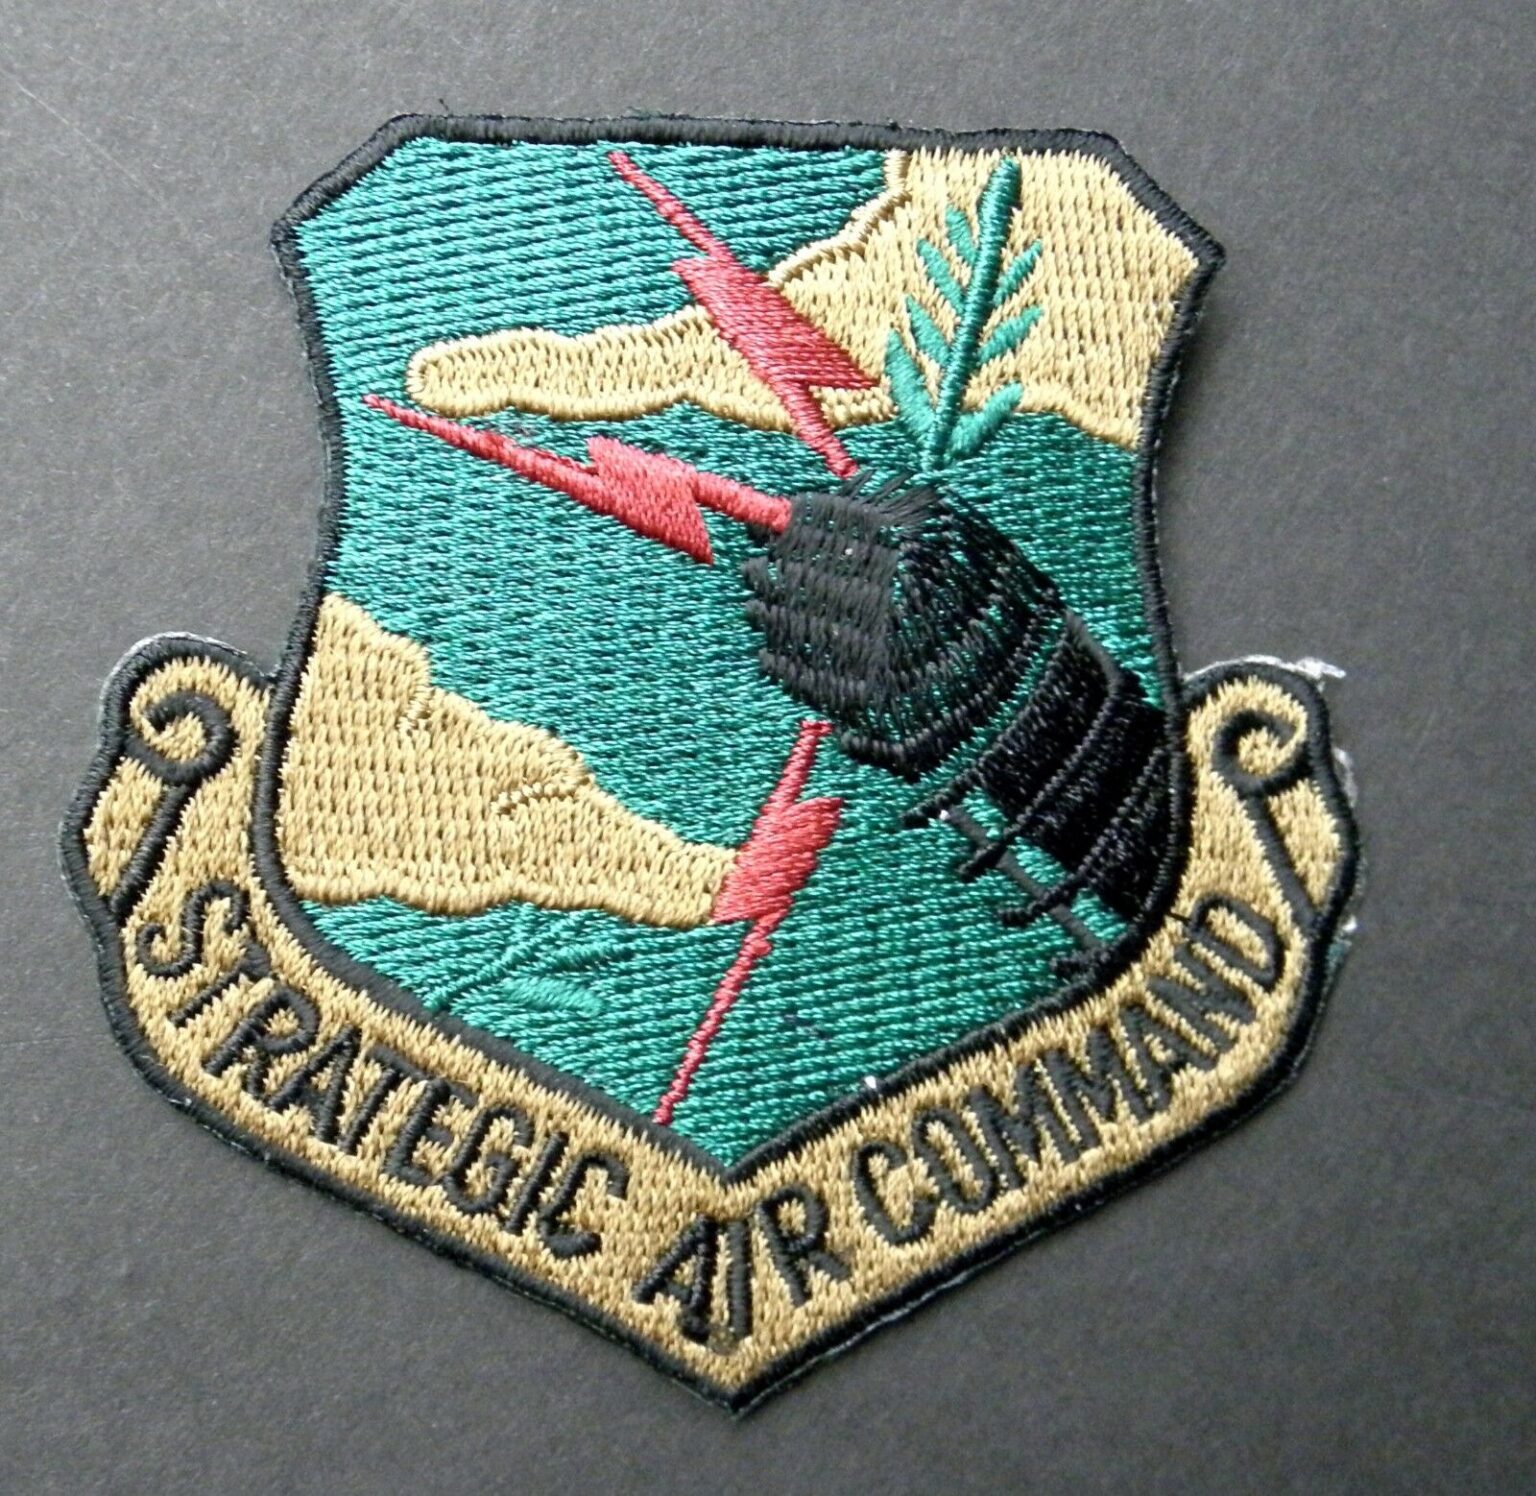 USA AIR FORCE STRATEGIC AIR COMMAND SHIELD SUBDUED EMBLEM PATCH 3